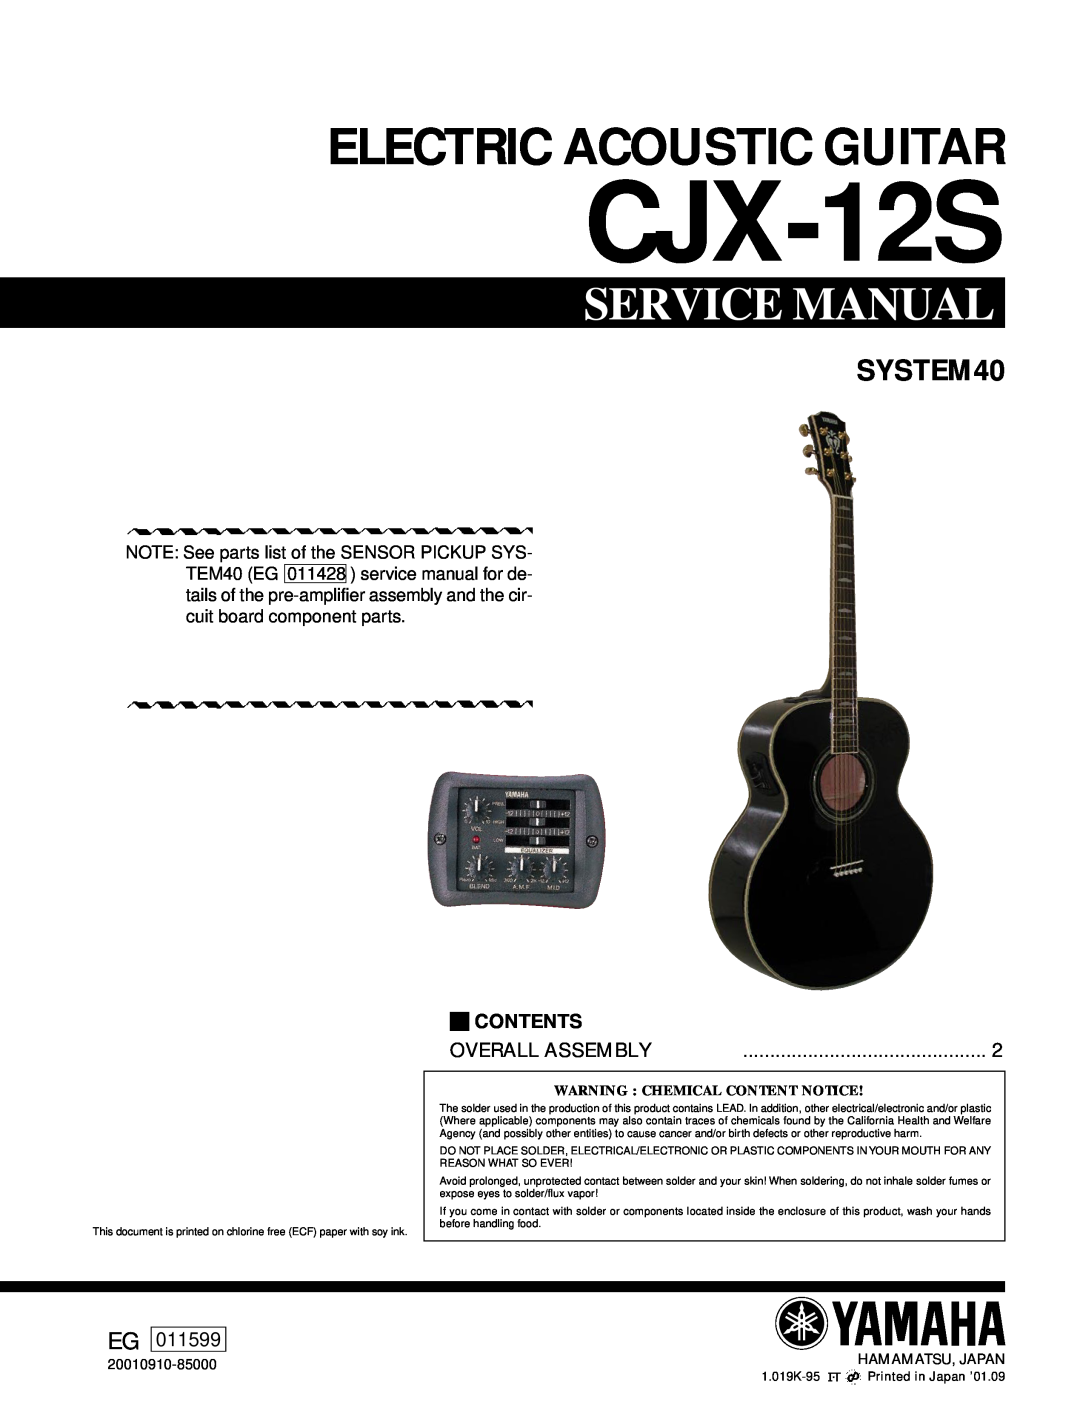 Yamaha Yamaha Electric Acoustic Guitar service manual CJX-12S, Service Manual, SYSTEM40, Contents, Overall Assembly 